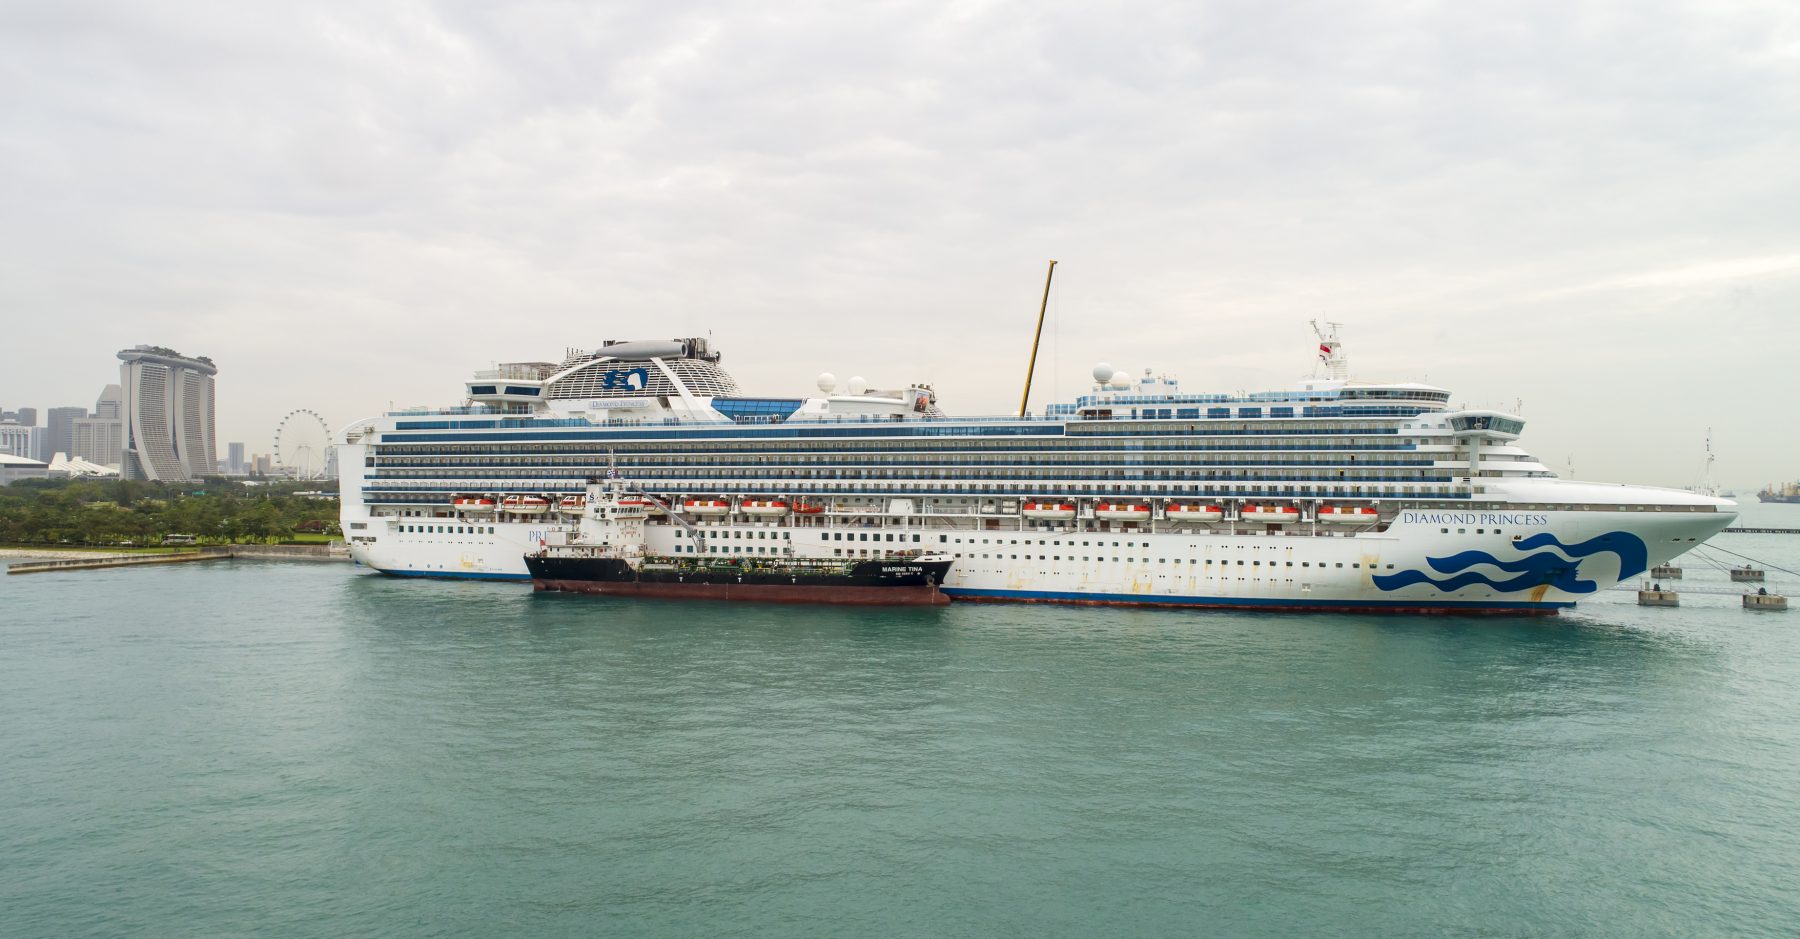 Diamond Princess completes dry dock with new upgrades